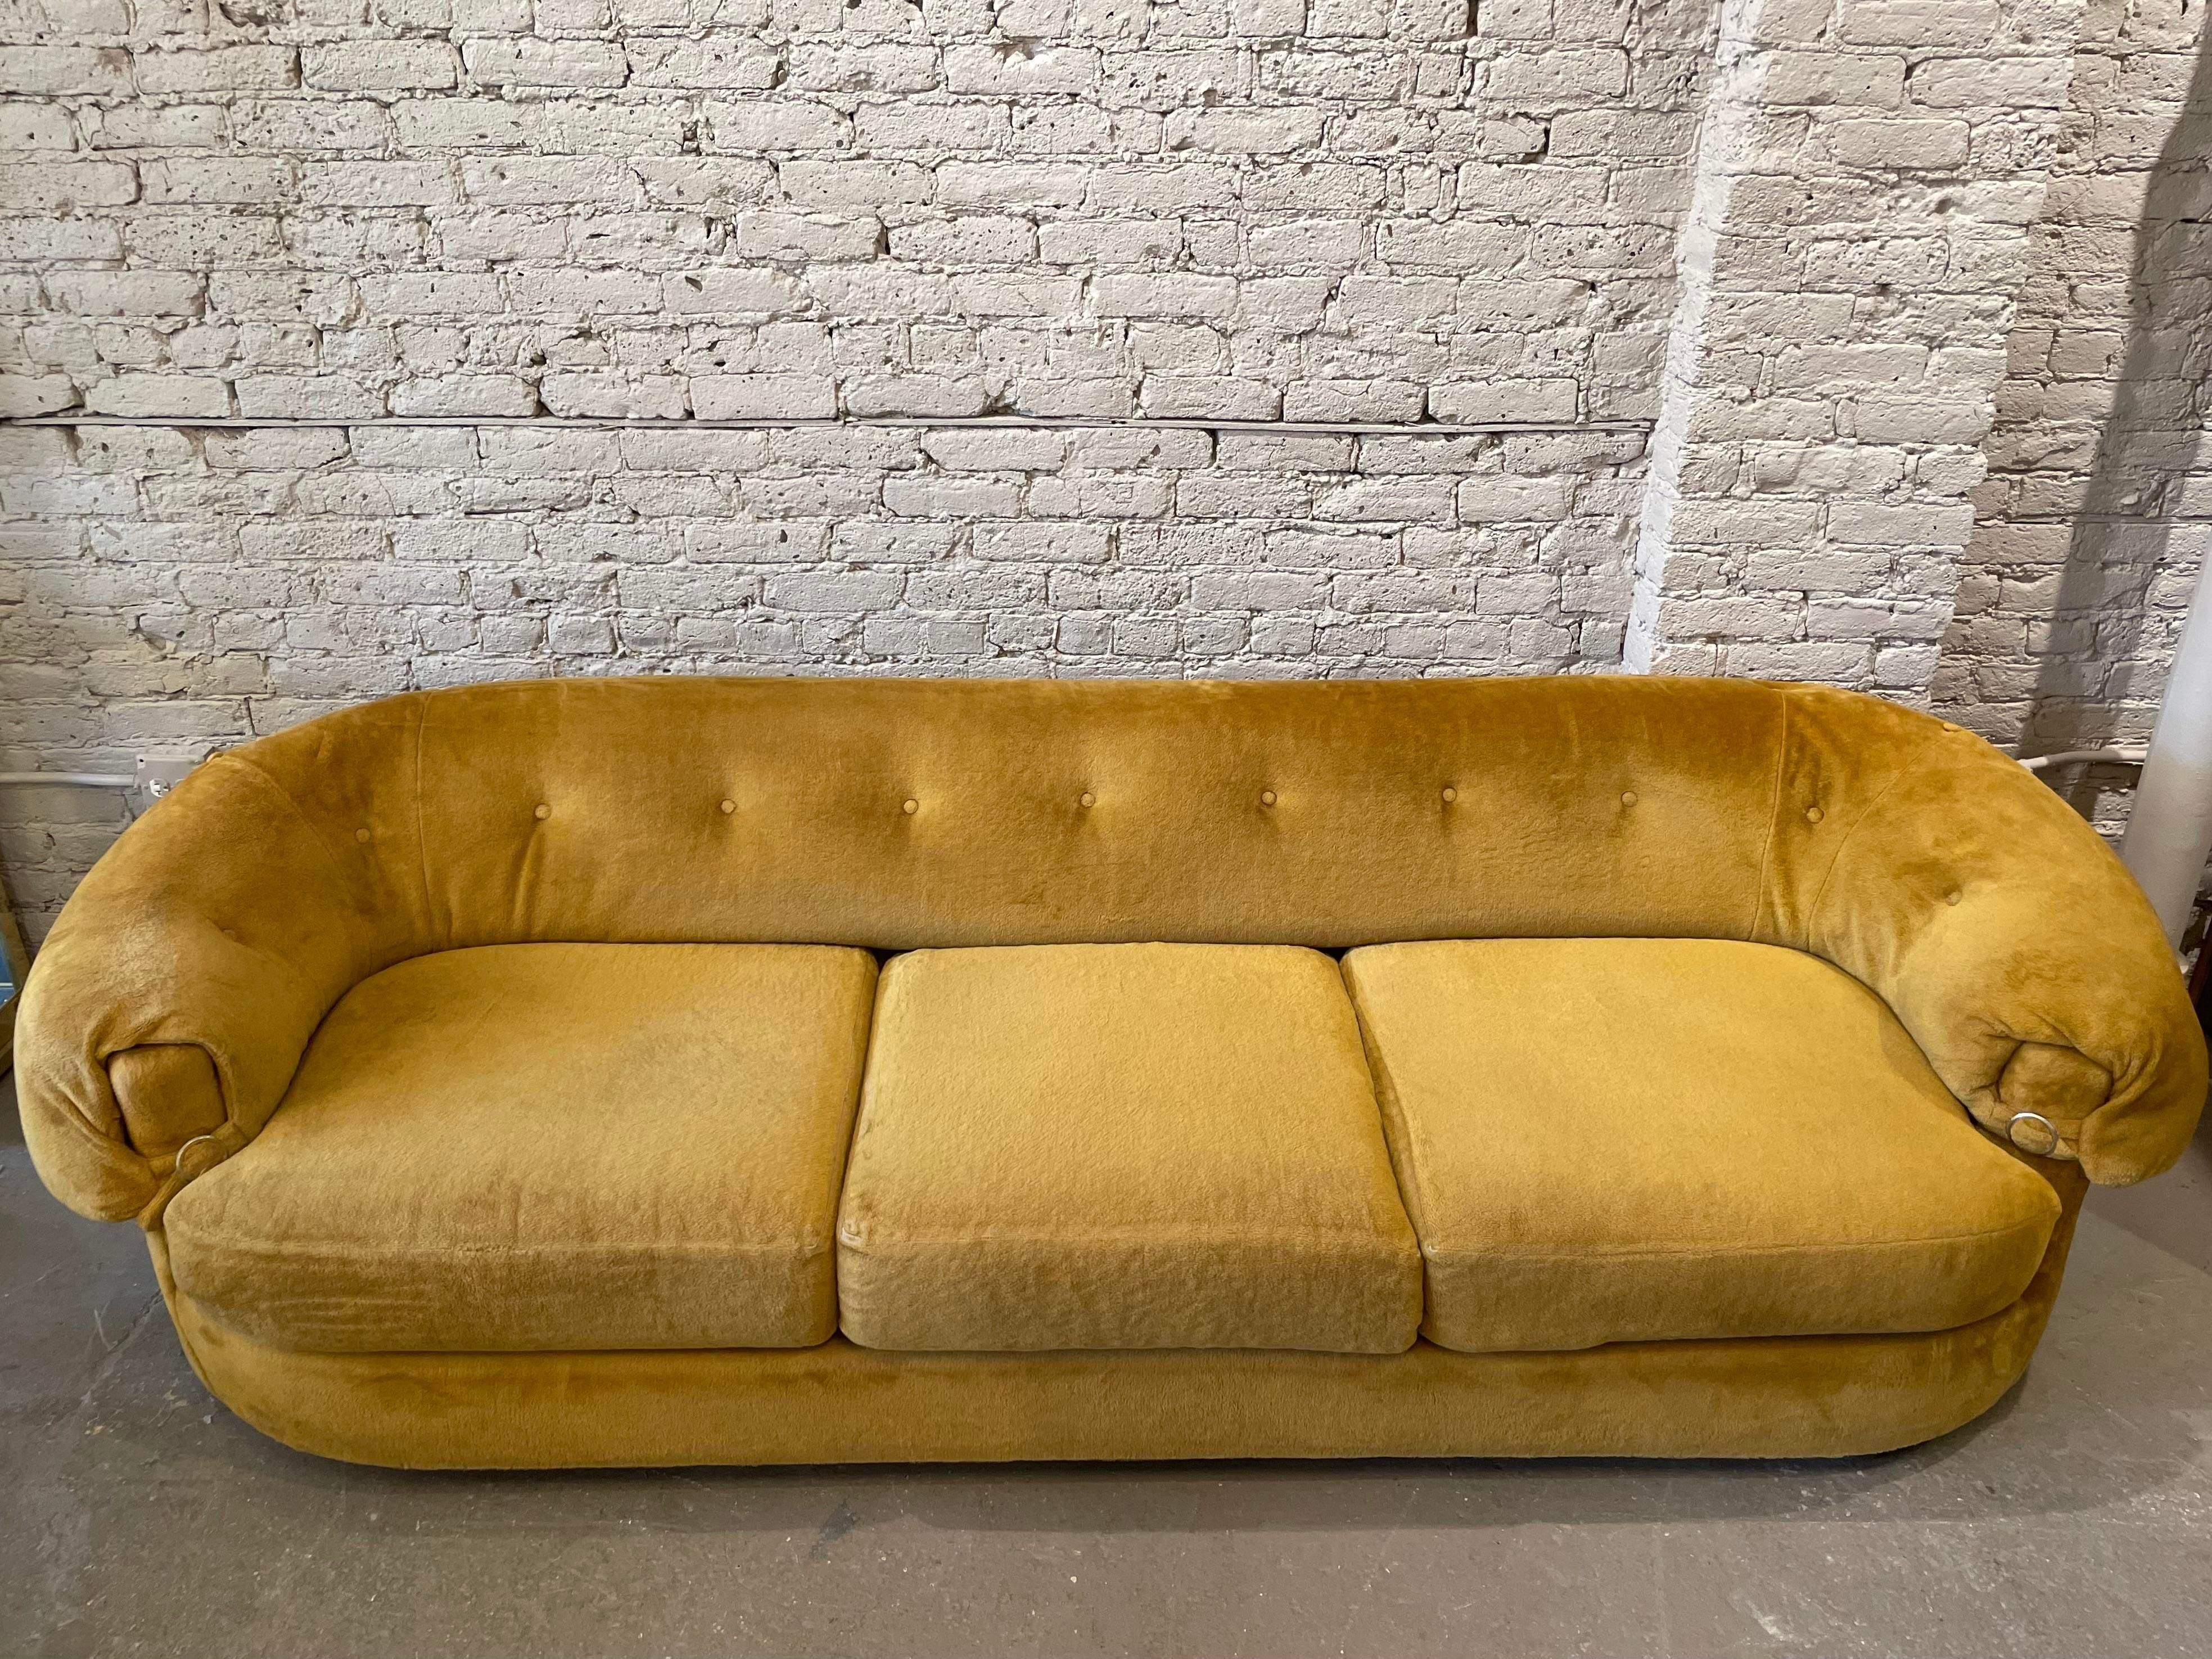 1970s Schweiger Teddy Bear Sofa In Good Condition For Sale In Chicago, IL